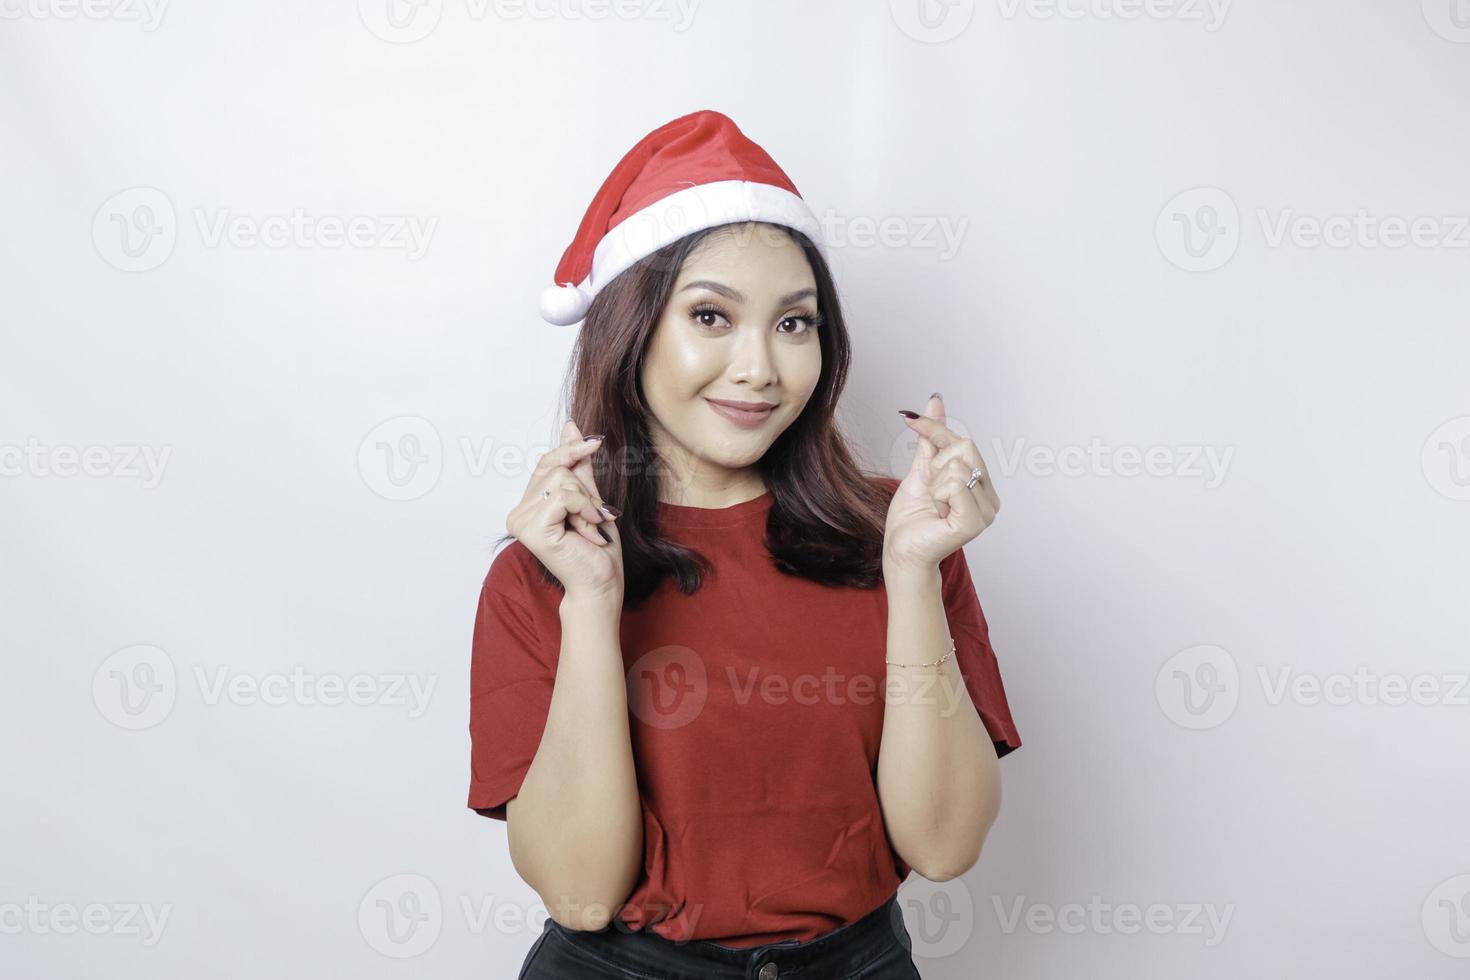 Happy Asian Santa woman is smiling and give romantic shapes heart gesture expresses tender feelings isolated by white background. Christmas concept. photo